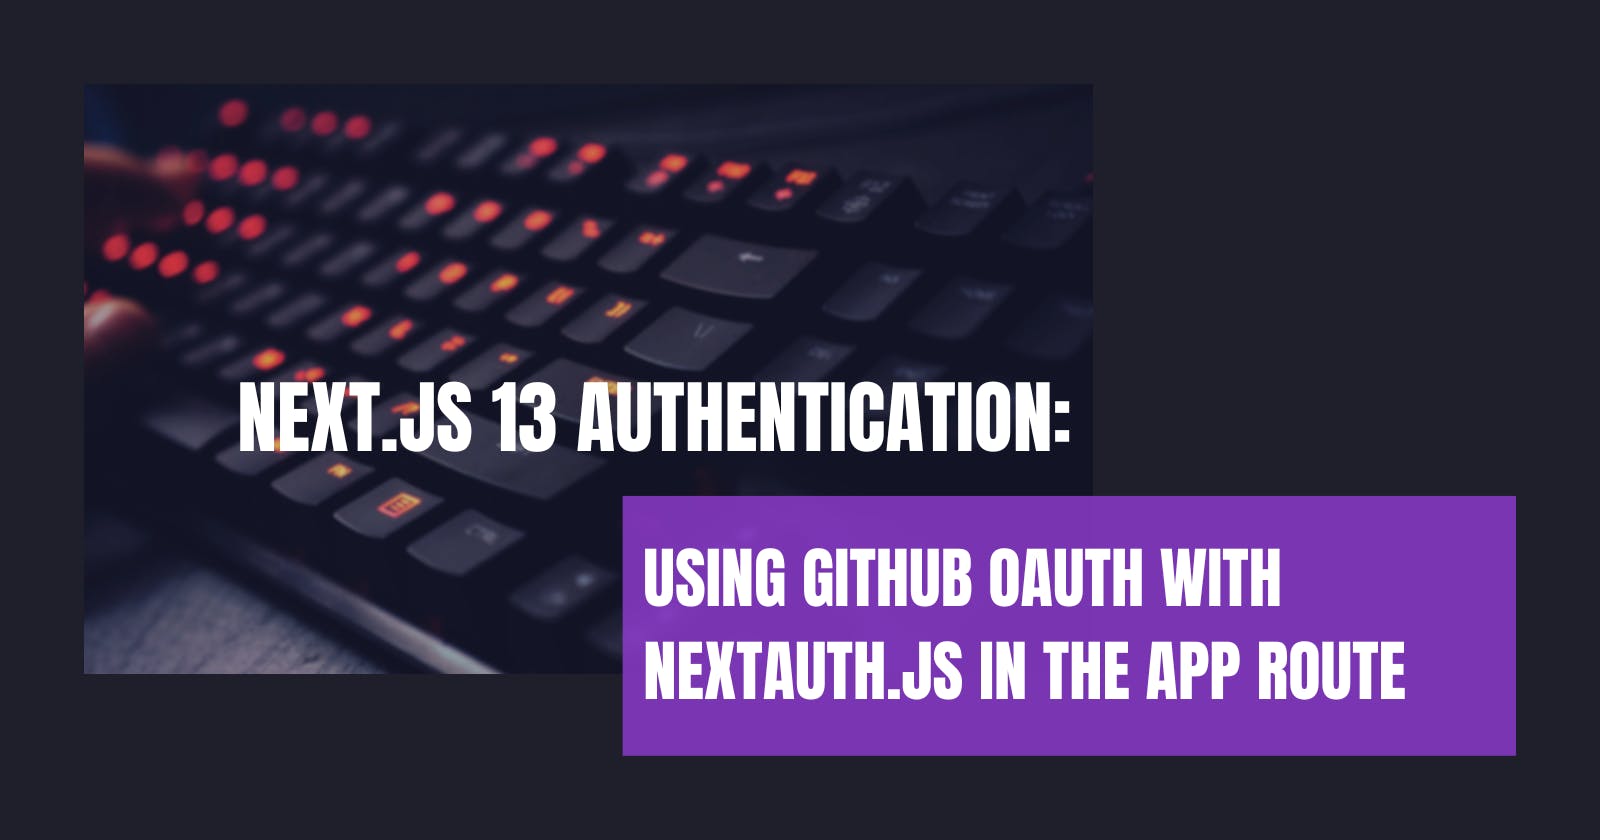 Next.js 13 Authentication: Using GitHub OAuth with NextAuth.js in the App Route